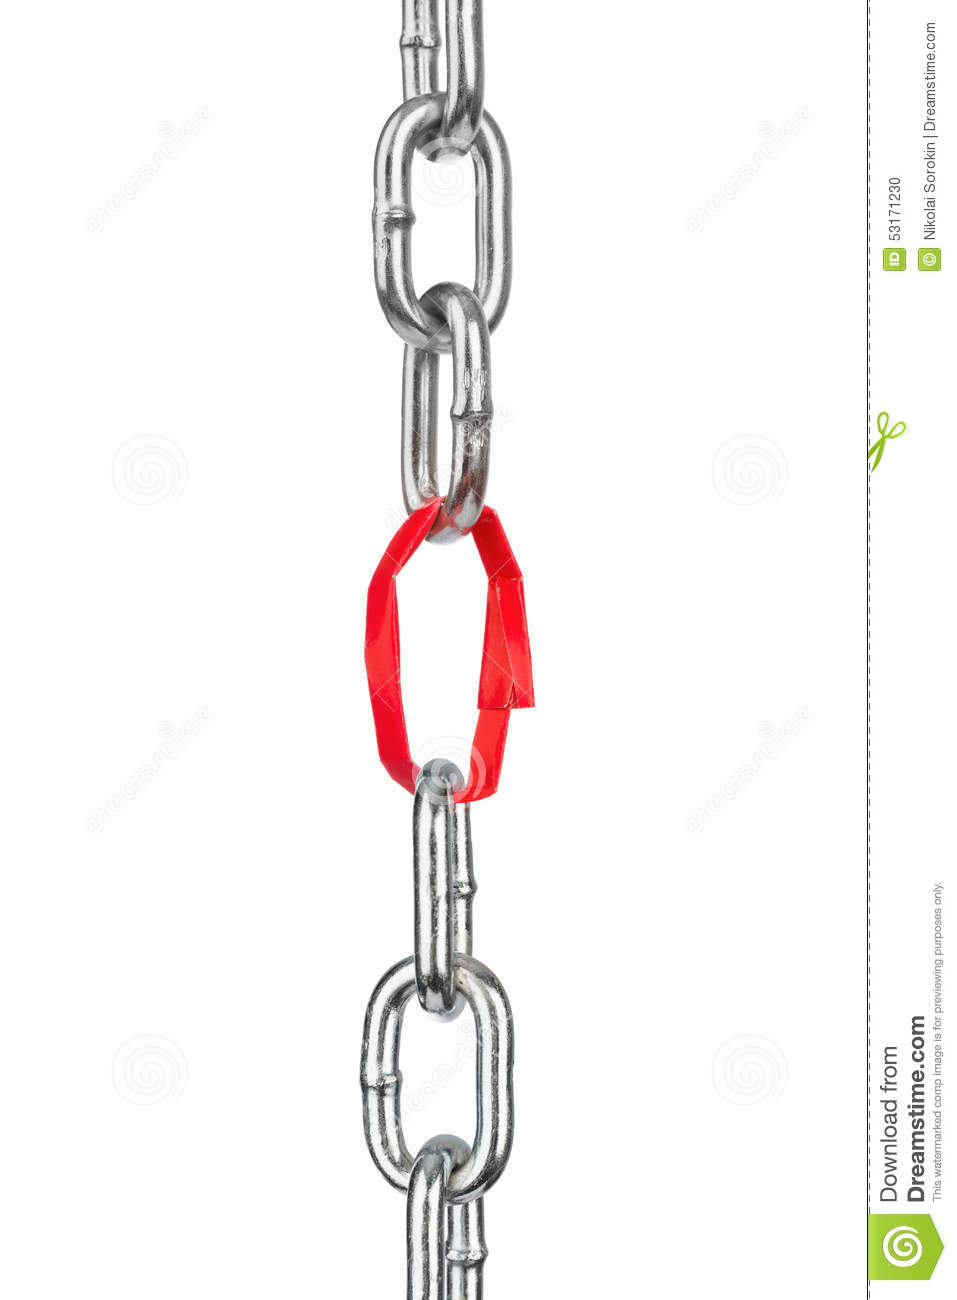 Chain With Paper Link Stock Photo   Image  53171230